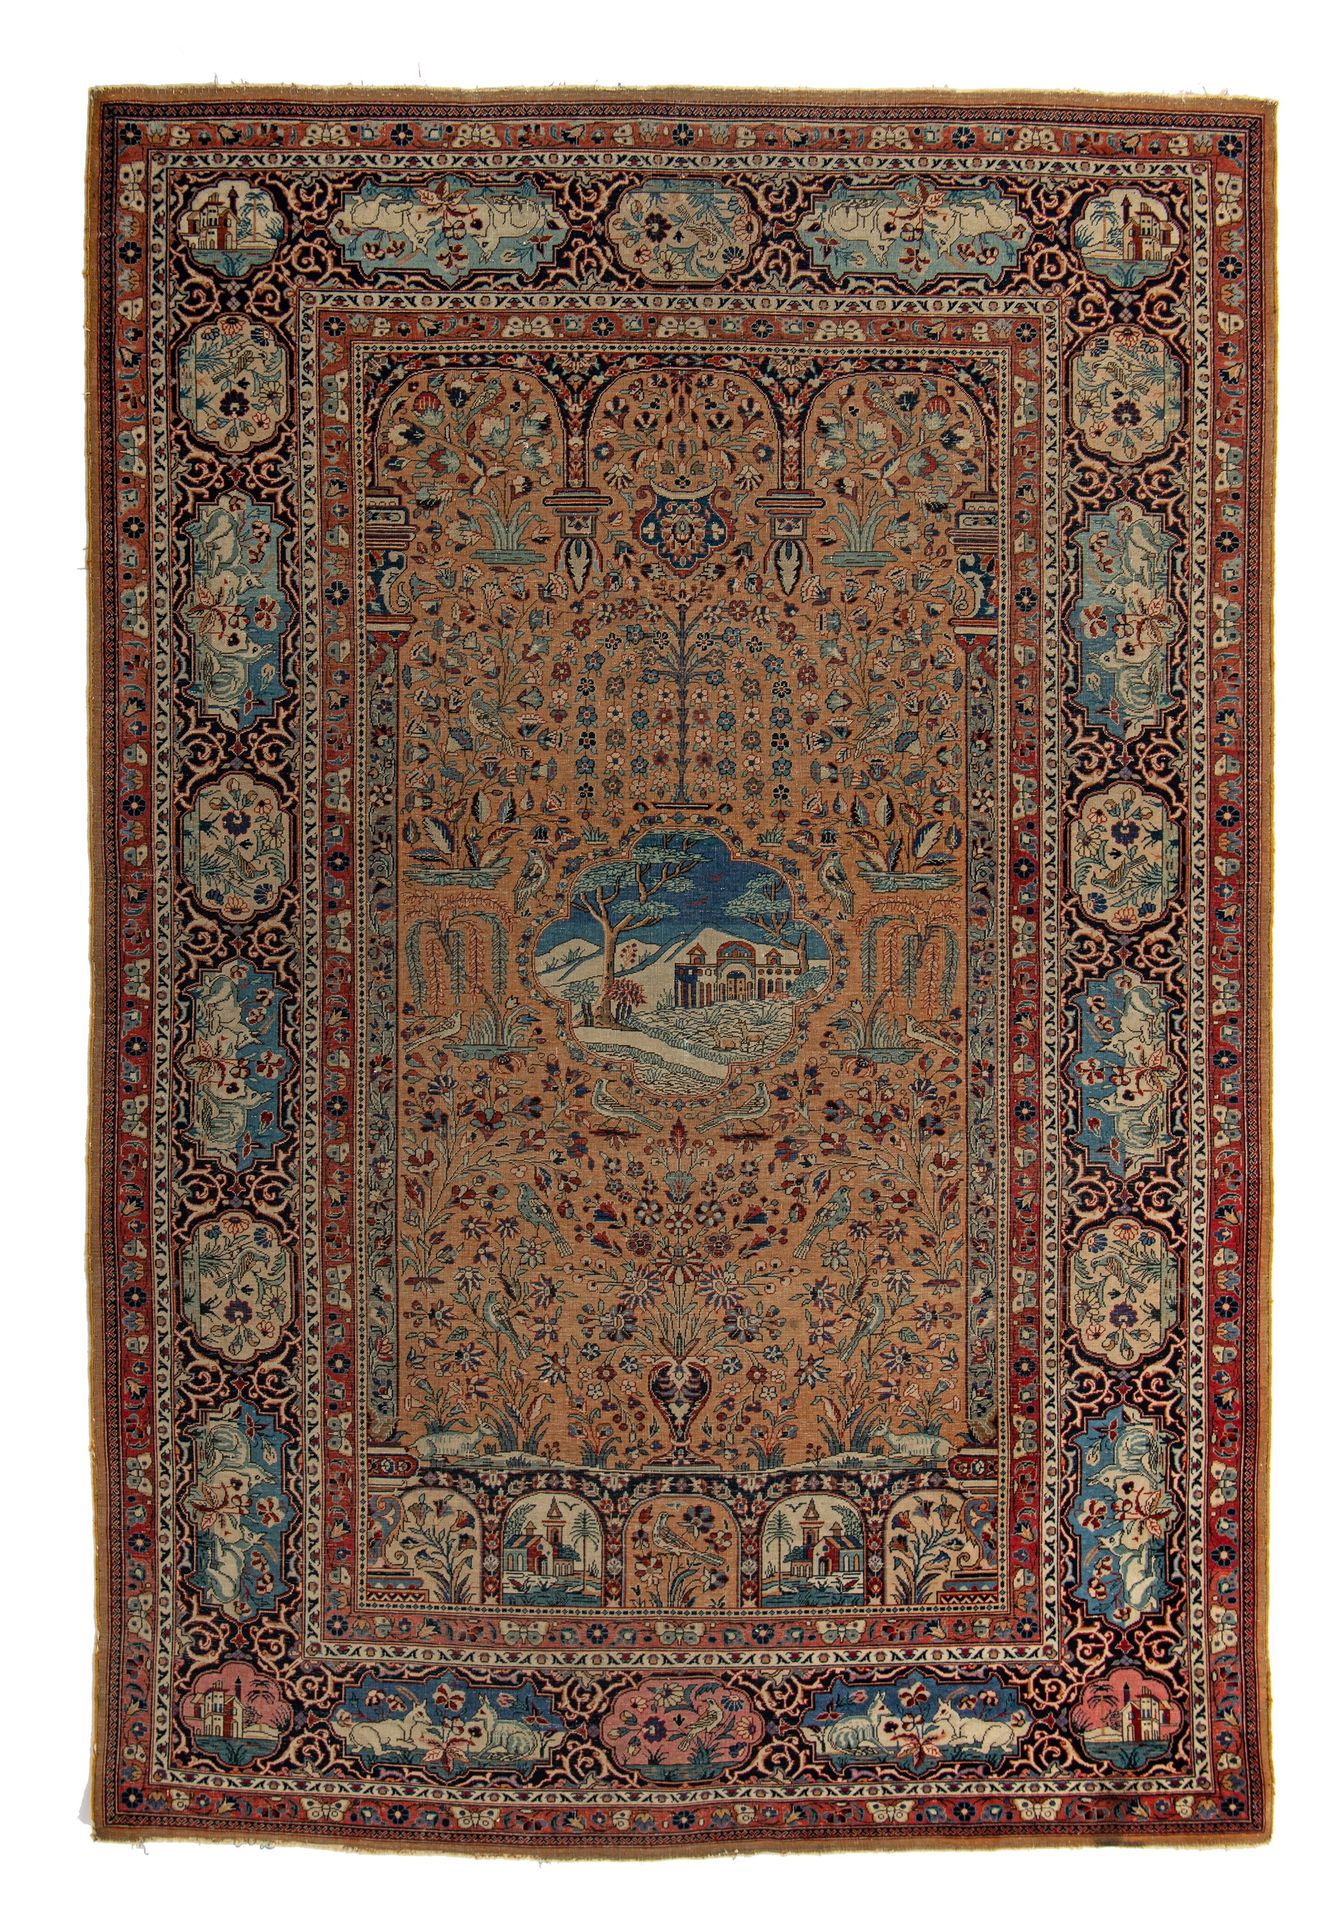 A fine antique Persian Kashan rug, 196 x 130 cm (+) Antico tappeto persiano Kash&hellip;